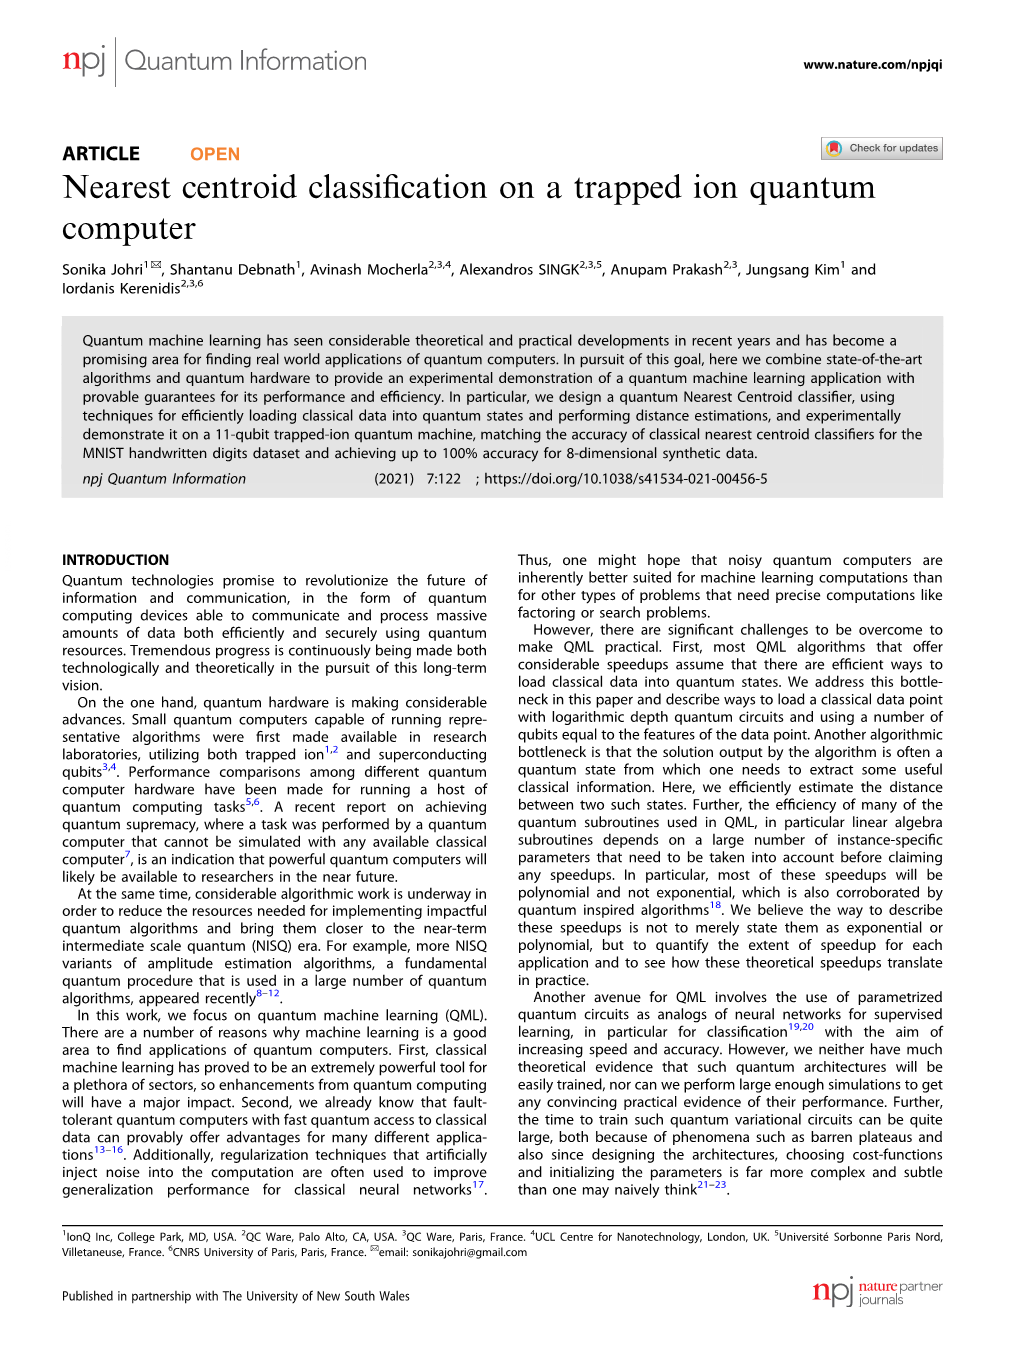 Nearest Centroid Classification on a Trapped Ion Quantum Computer